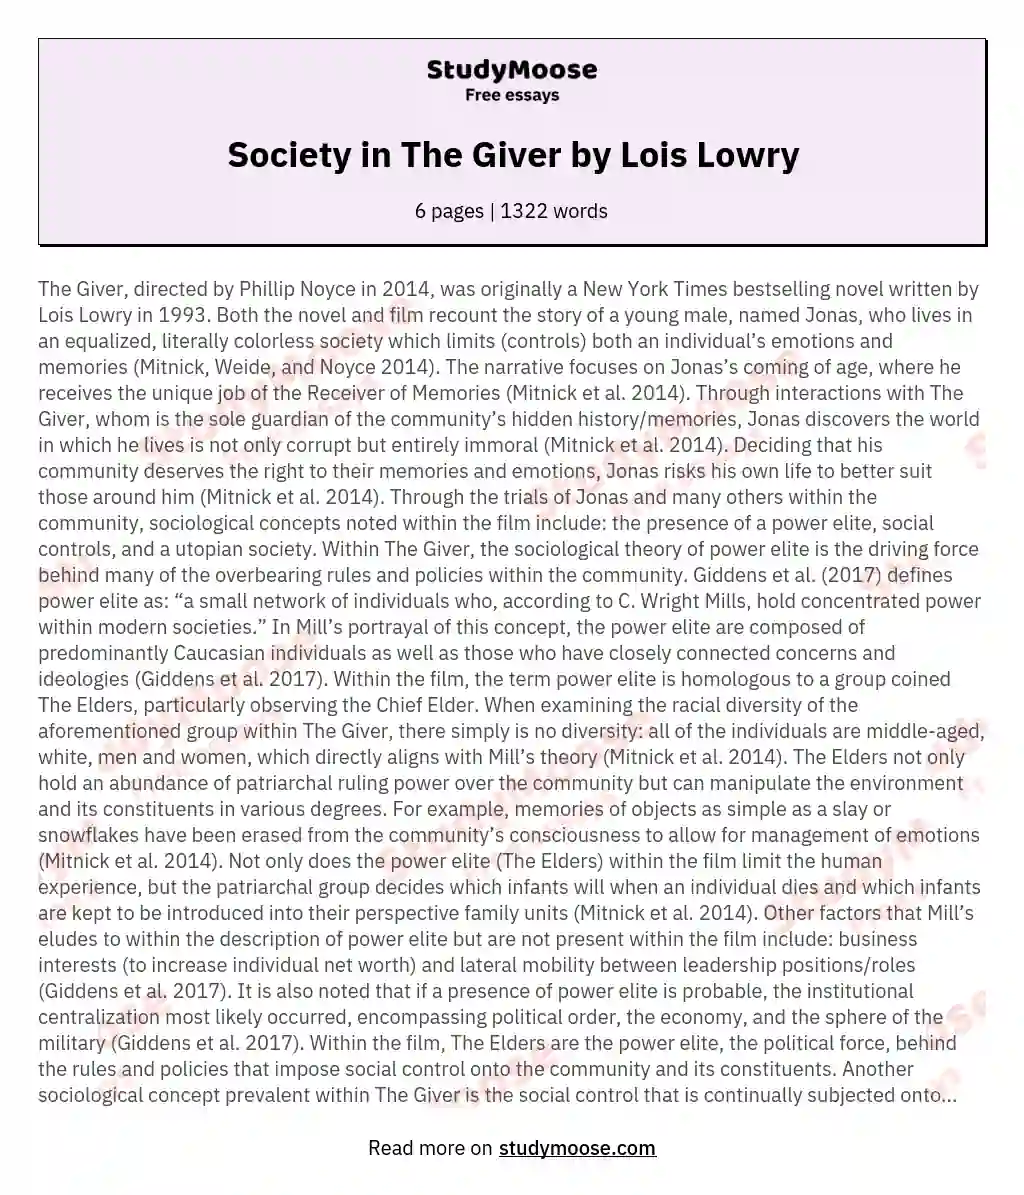 Society in The Giver by Lois Lowry essay